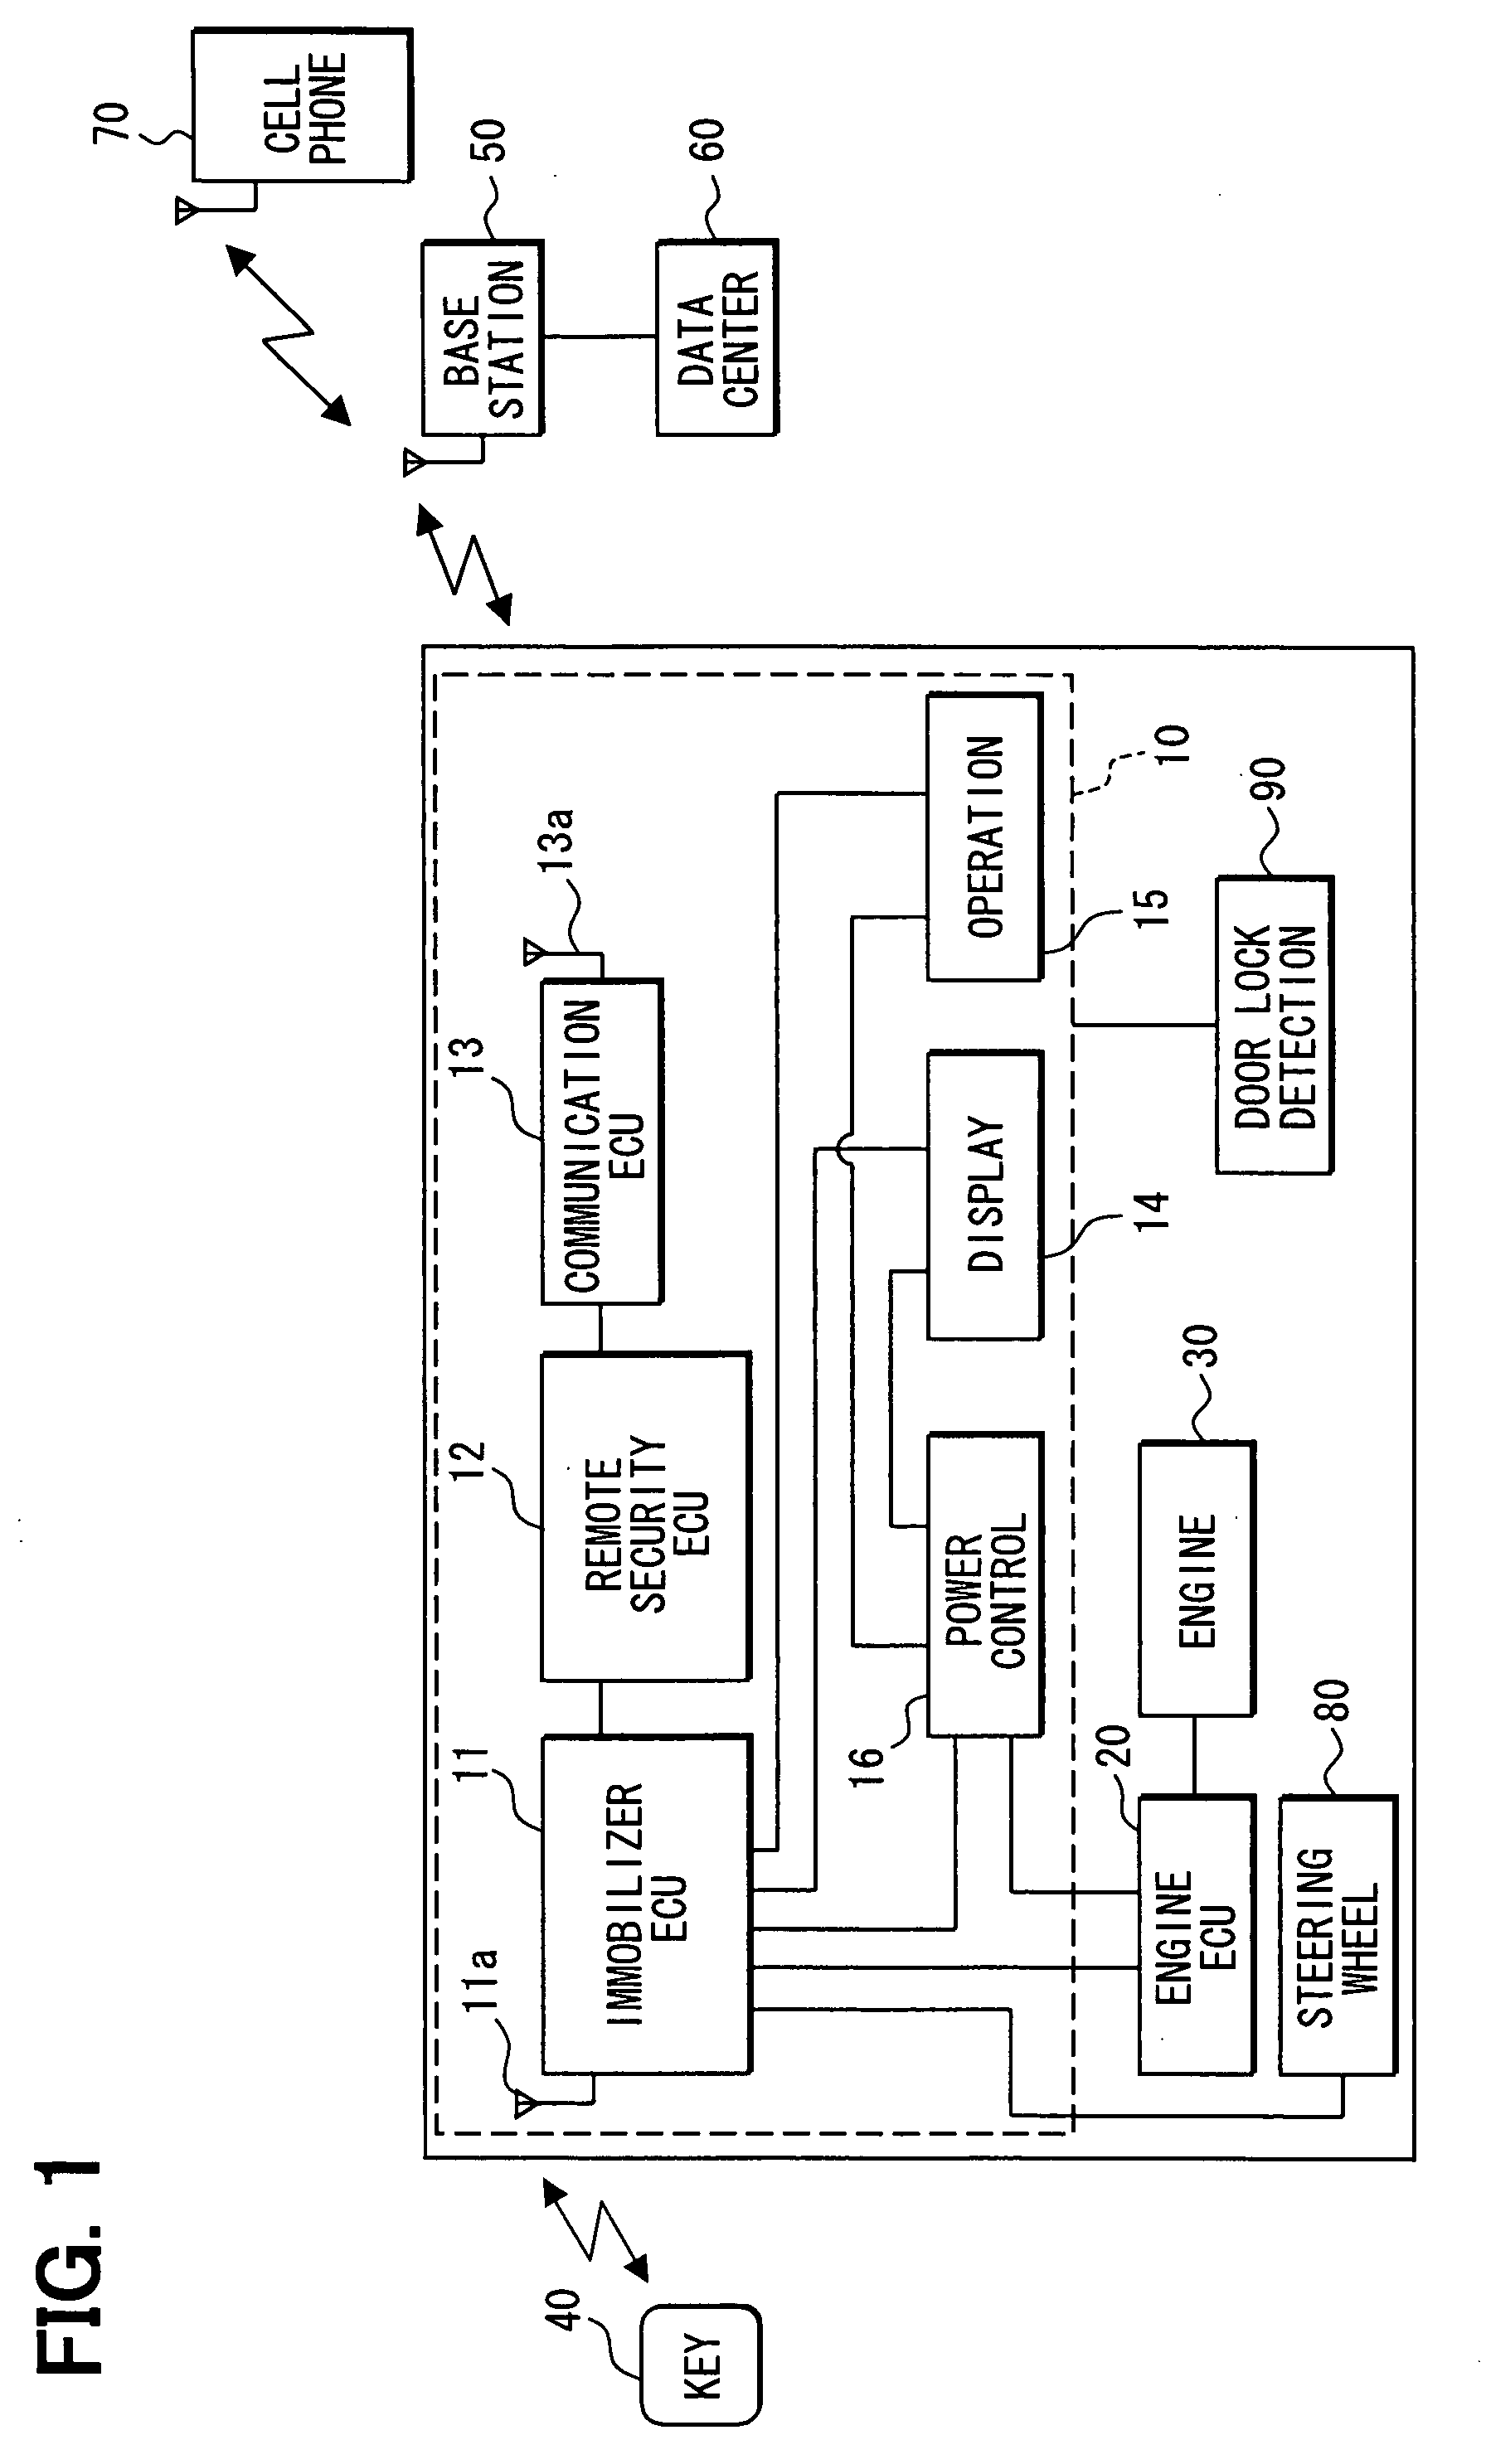 Vehicle security apparatus and system